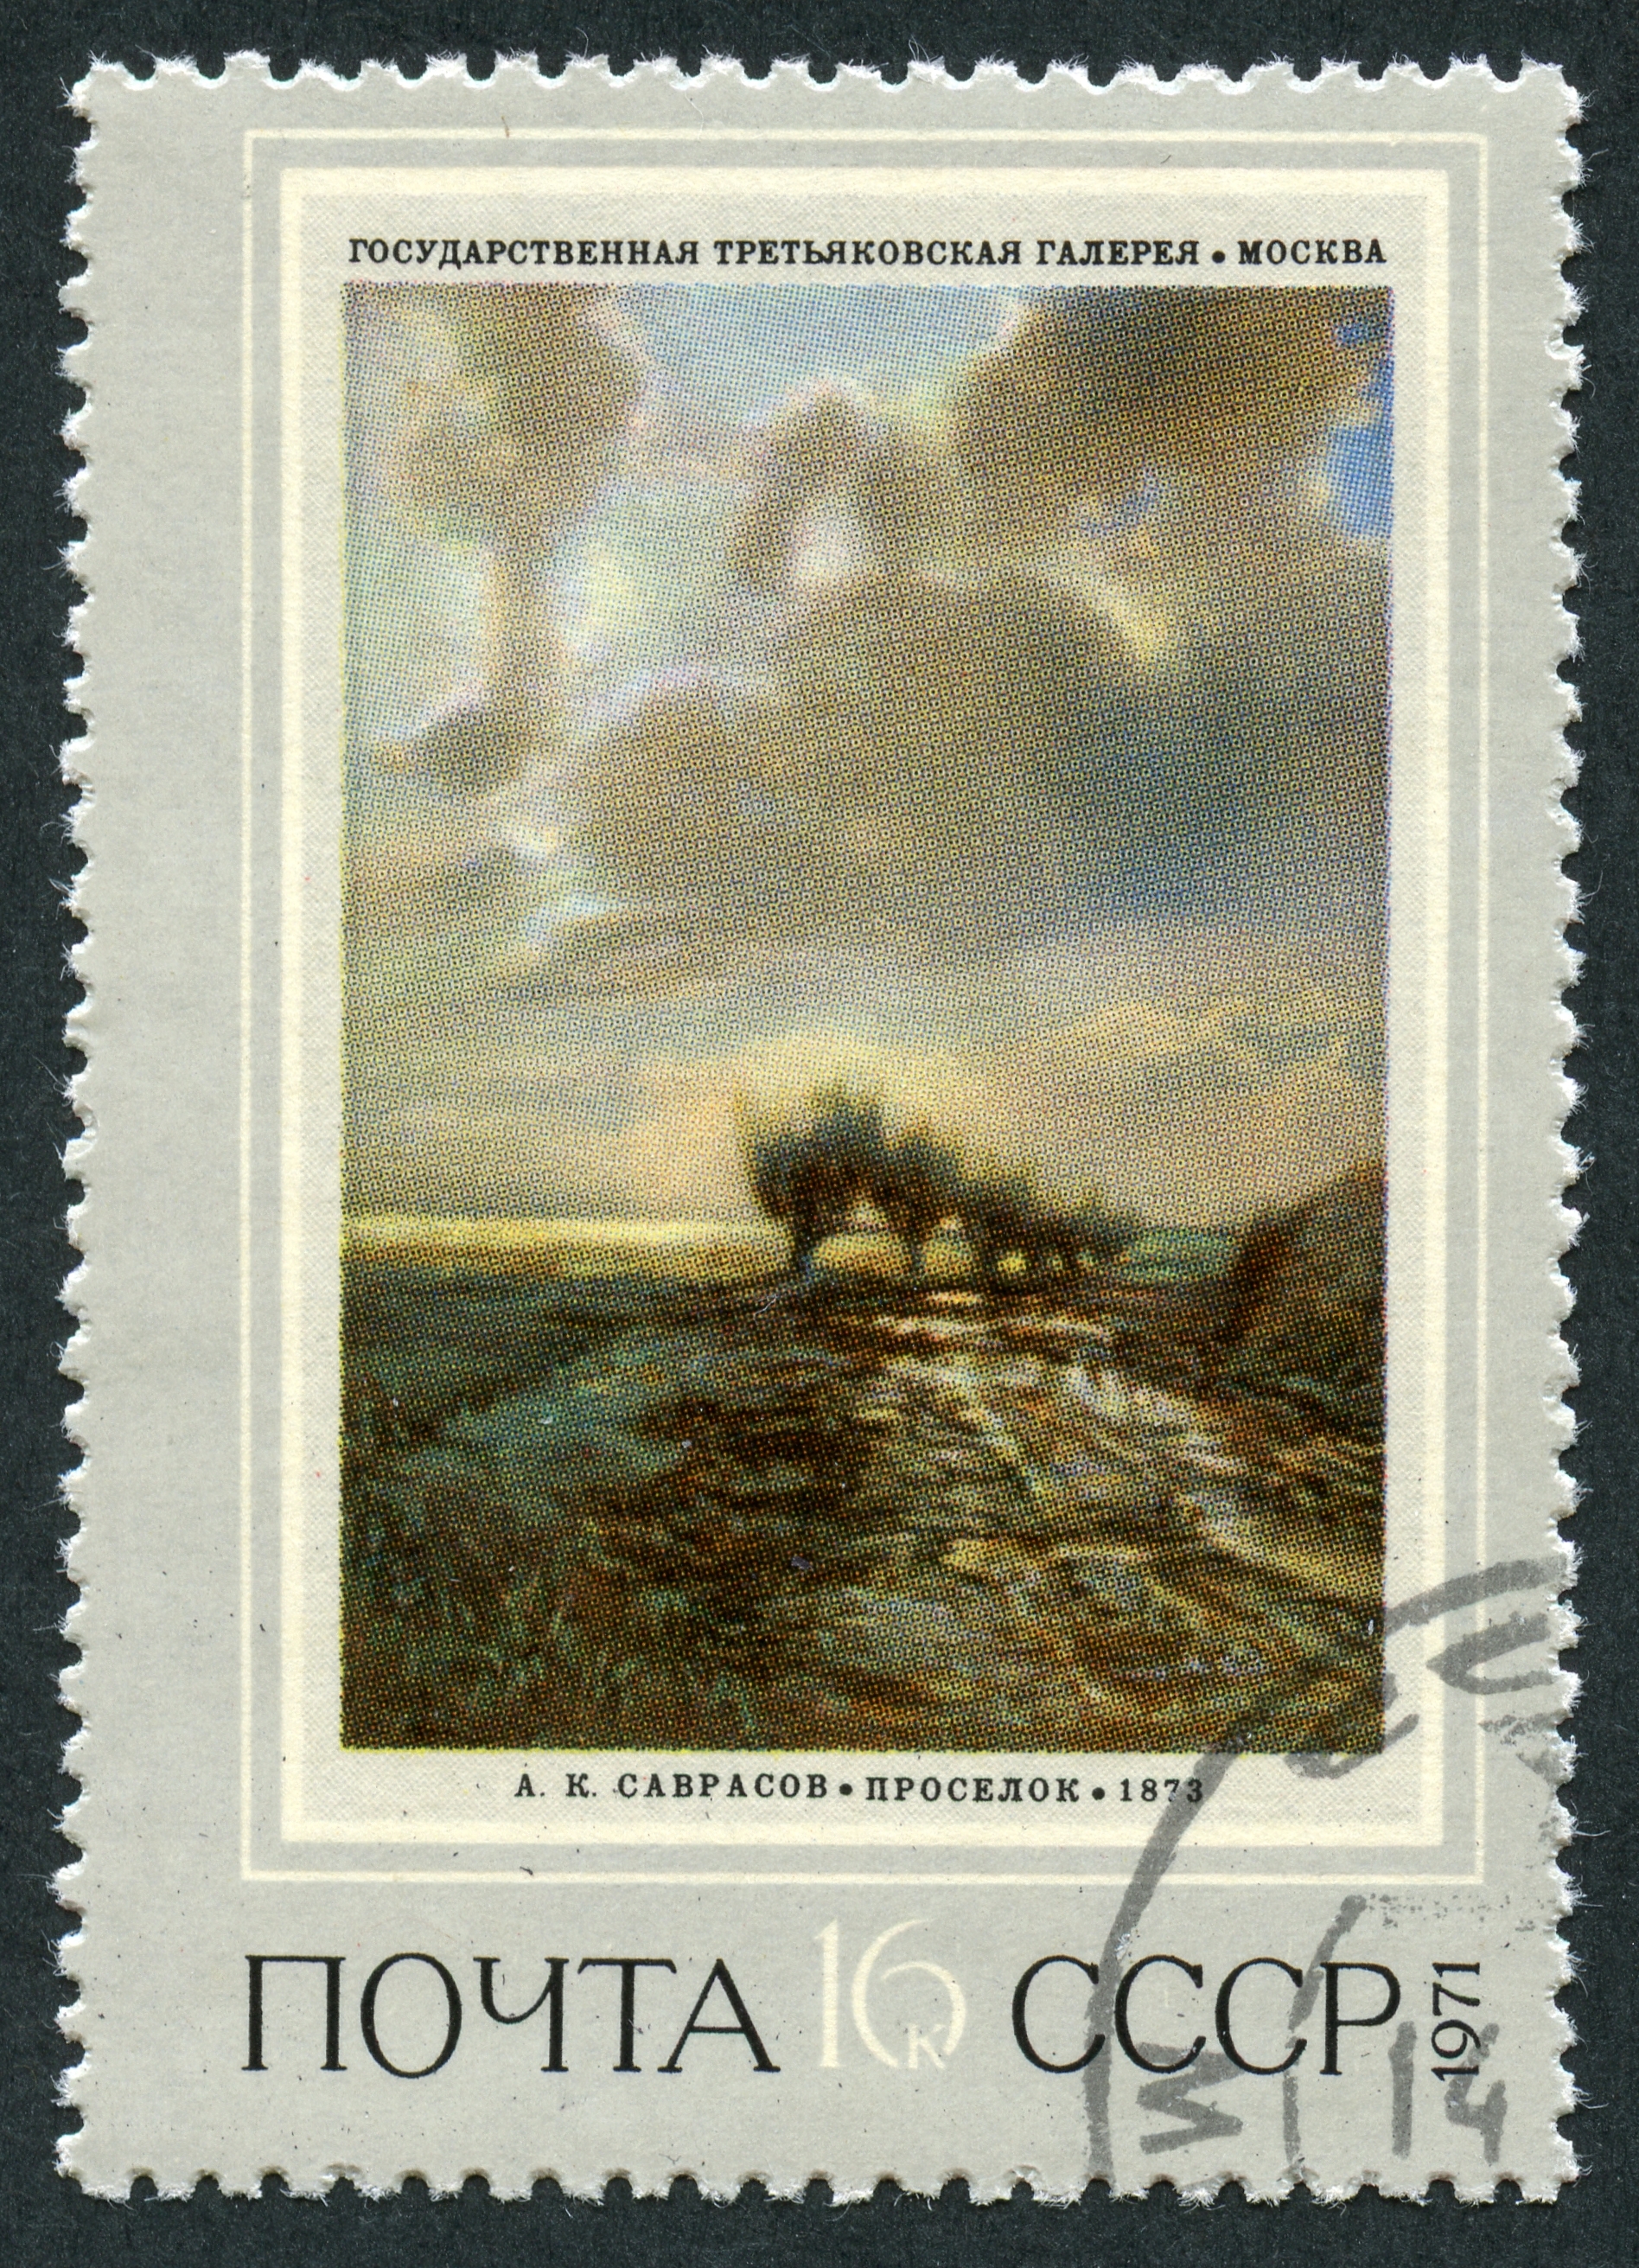 The Soviet Union 1971 CPA 4057 stamp (Country Road, by Alexei Savrasov) cancelled